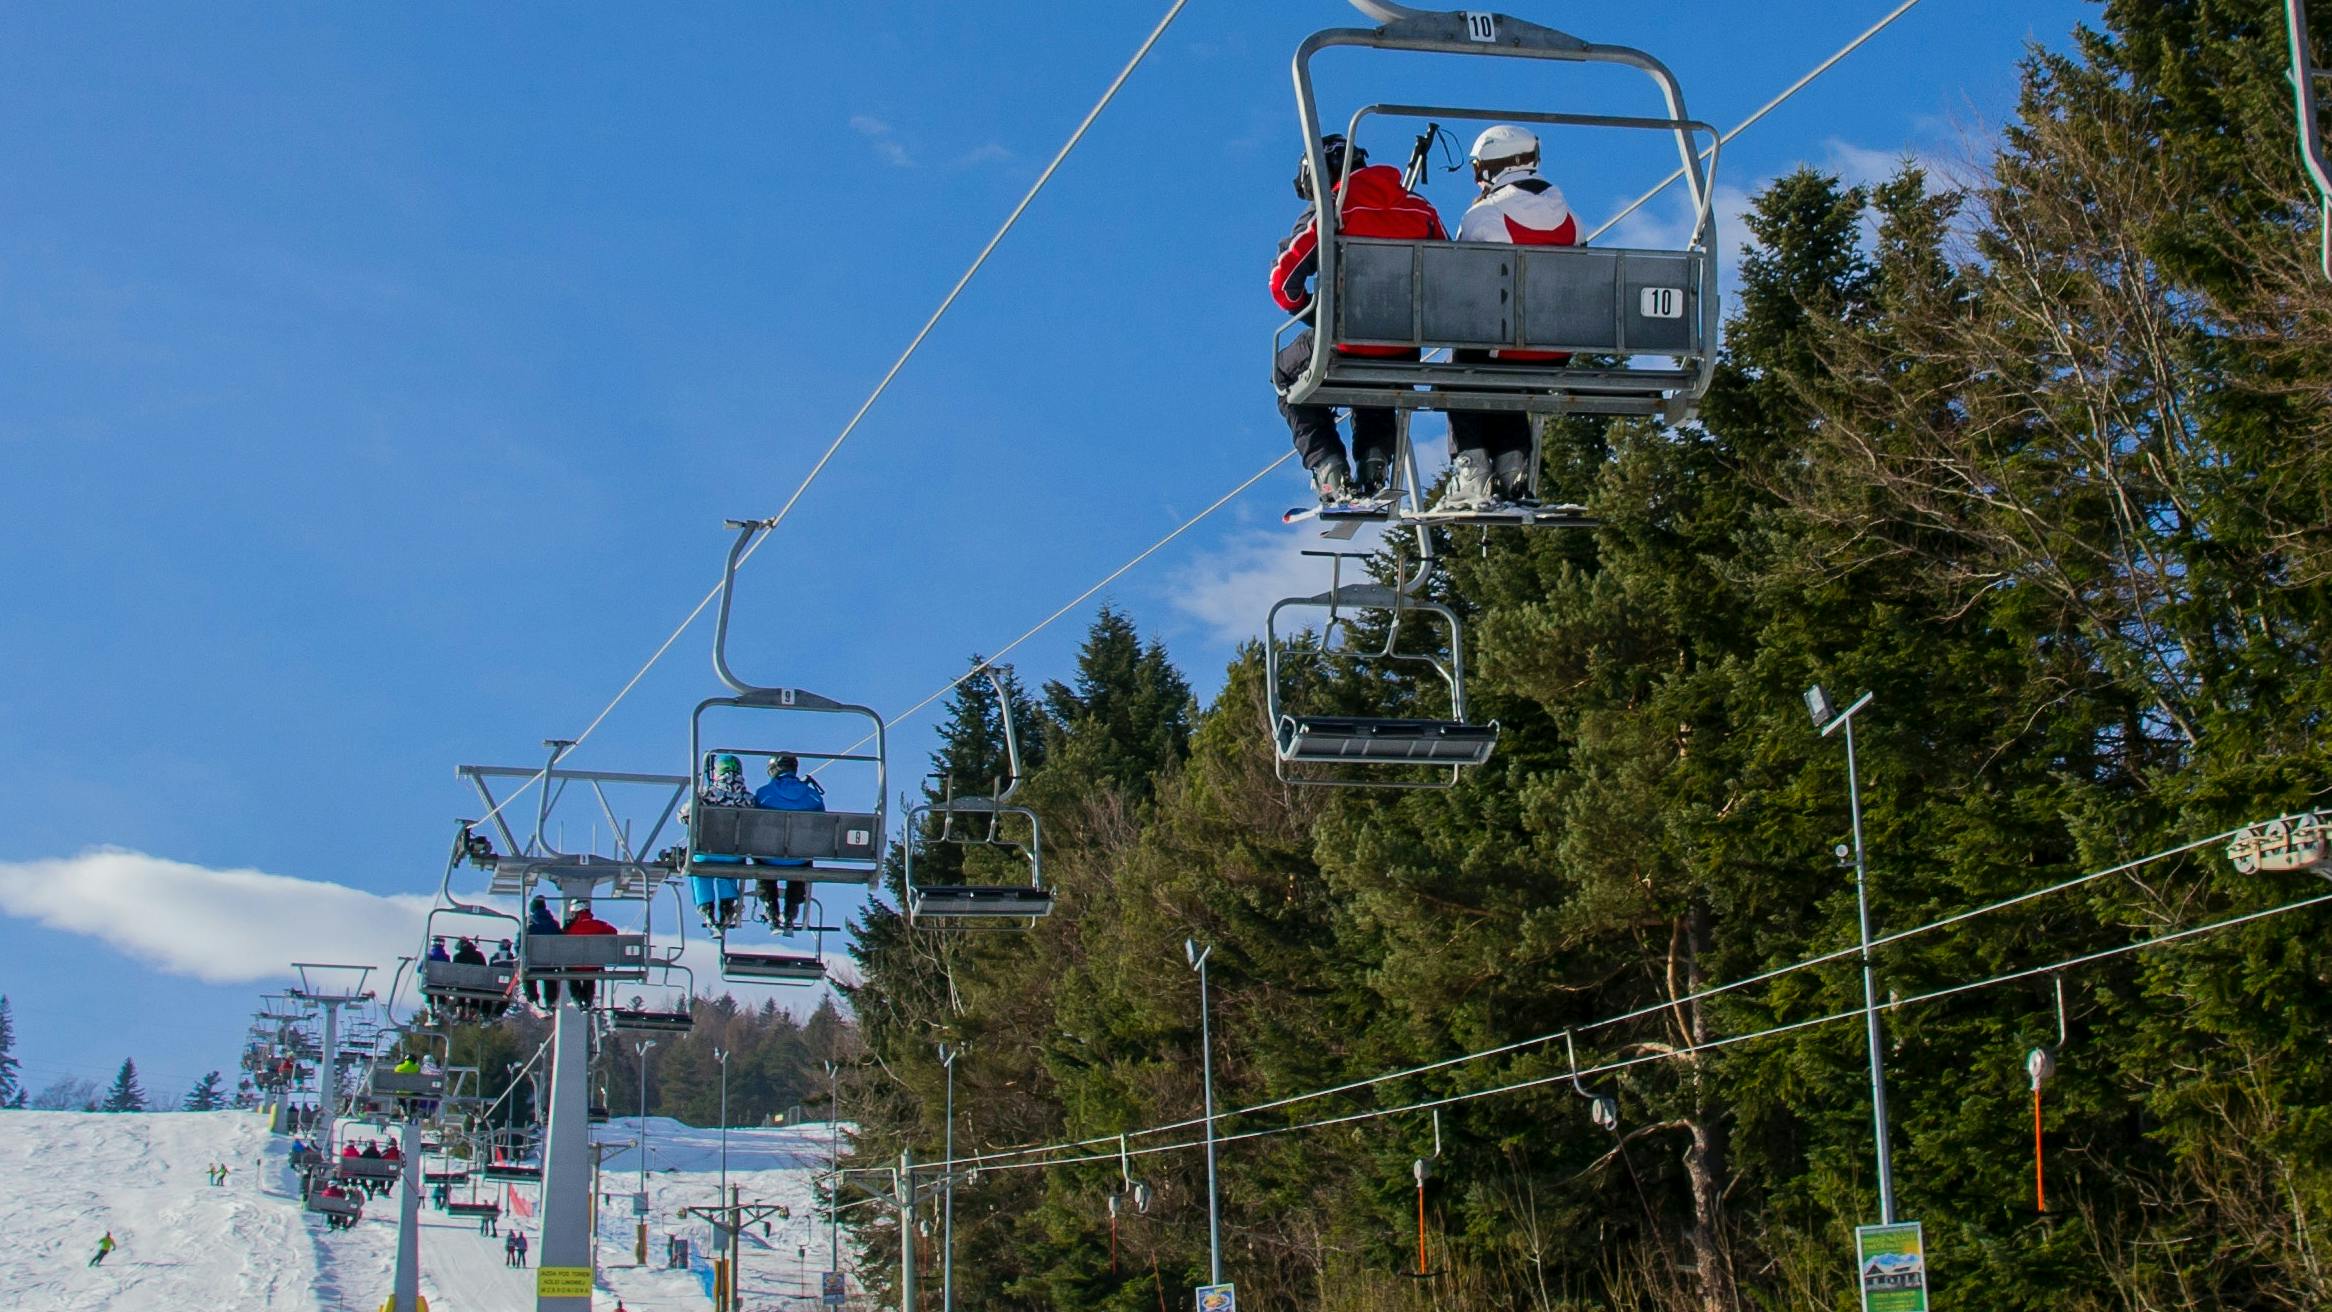 People ride a chairlift up a snowy mountain